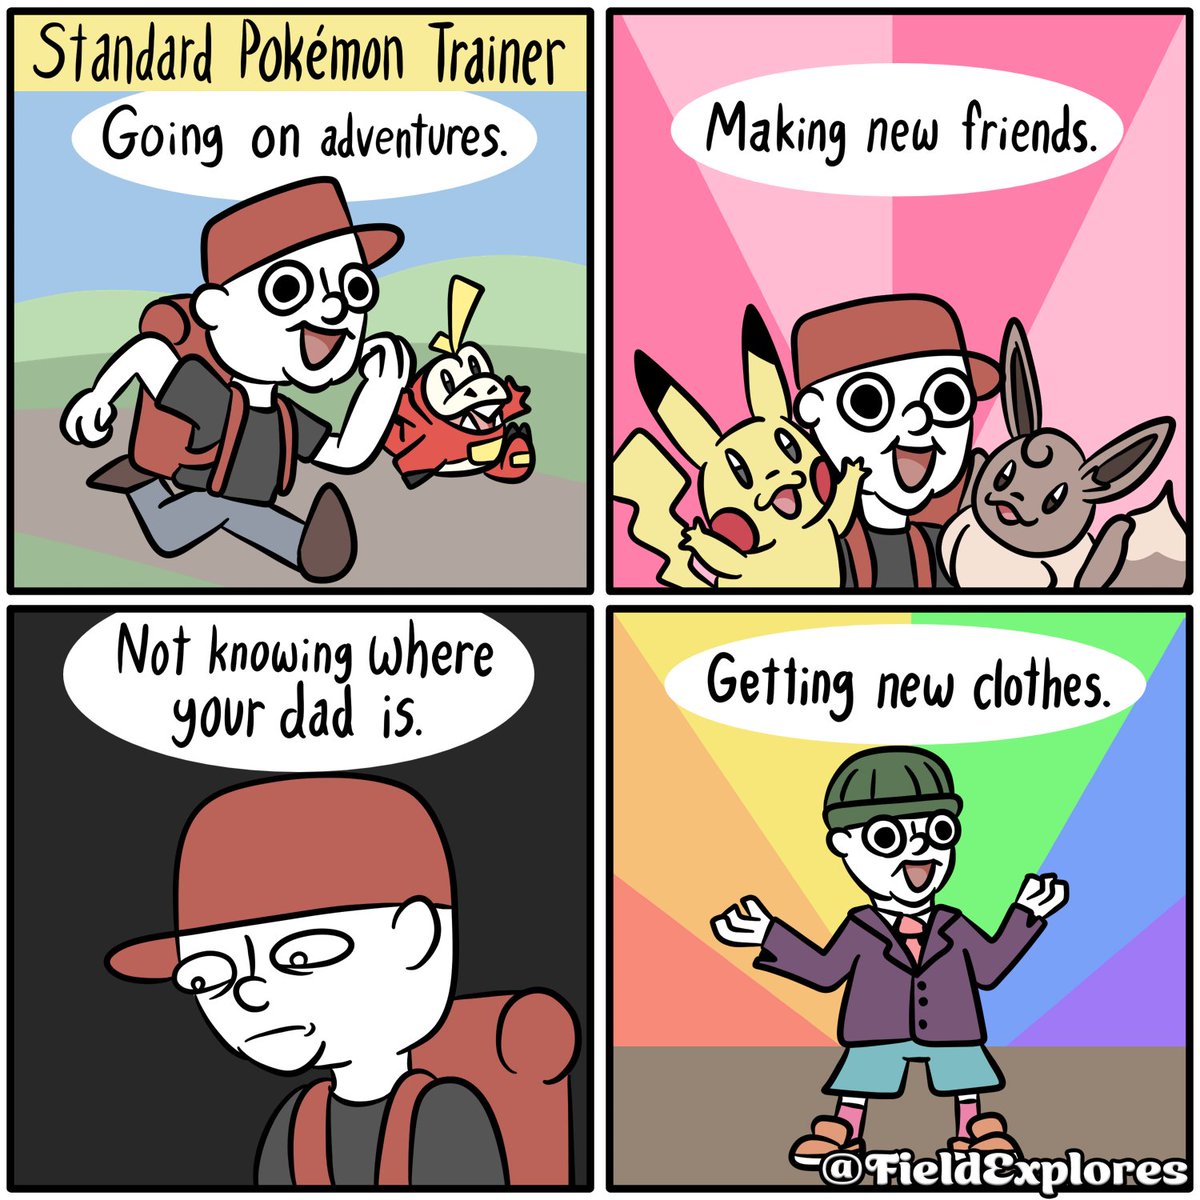 The Adventures of a Pokemon Trainer